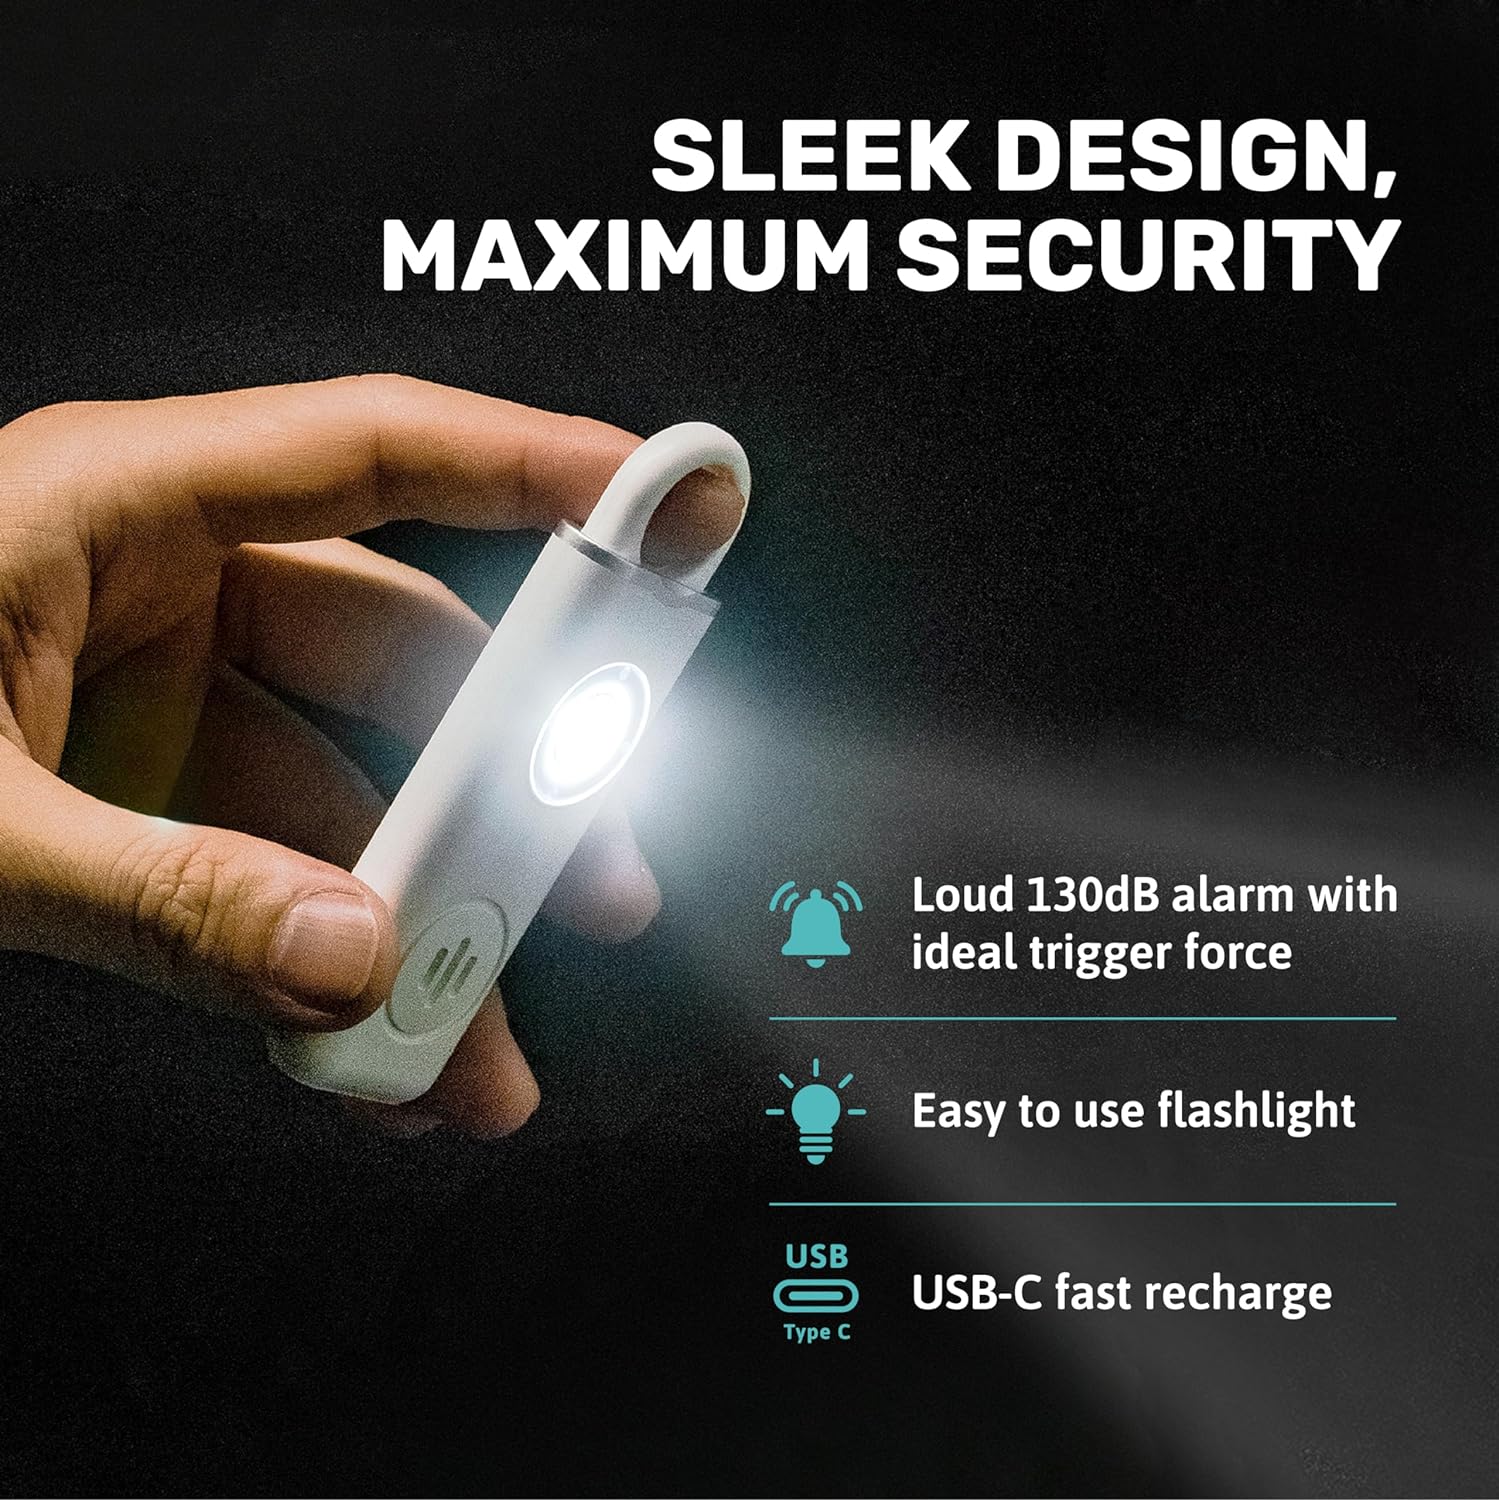 Personal Safety Alarm for Women with LED Flashlight. Safety Improved for Jogger, Walking Pets, and Outdoor Traveling. 130db Loud Siren, USB Type-C Rechargeable. (Smoky Black)